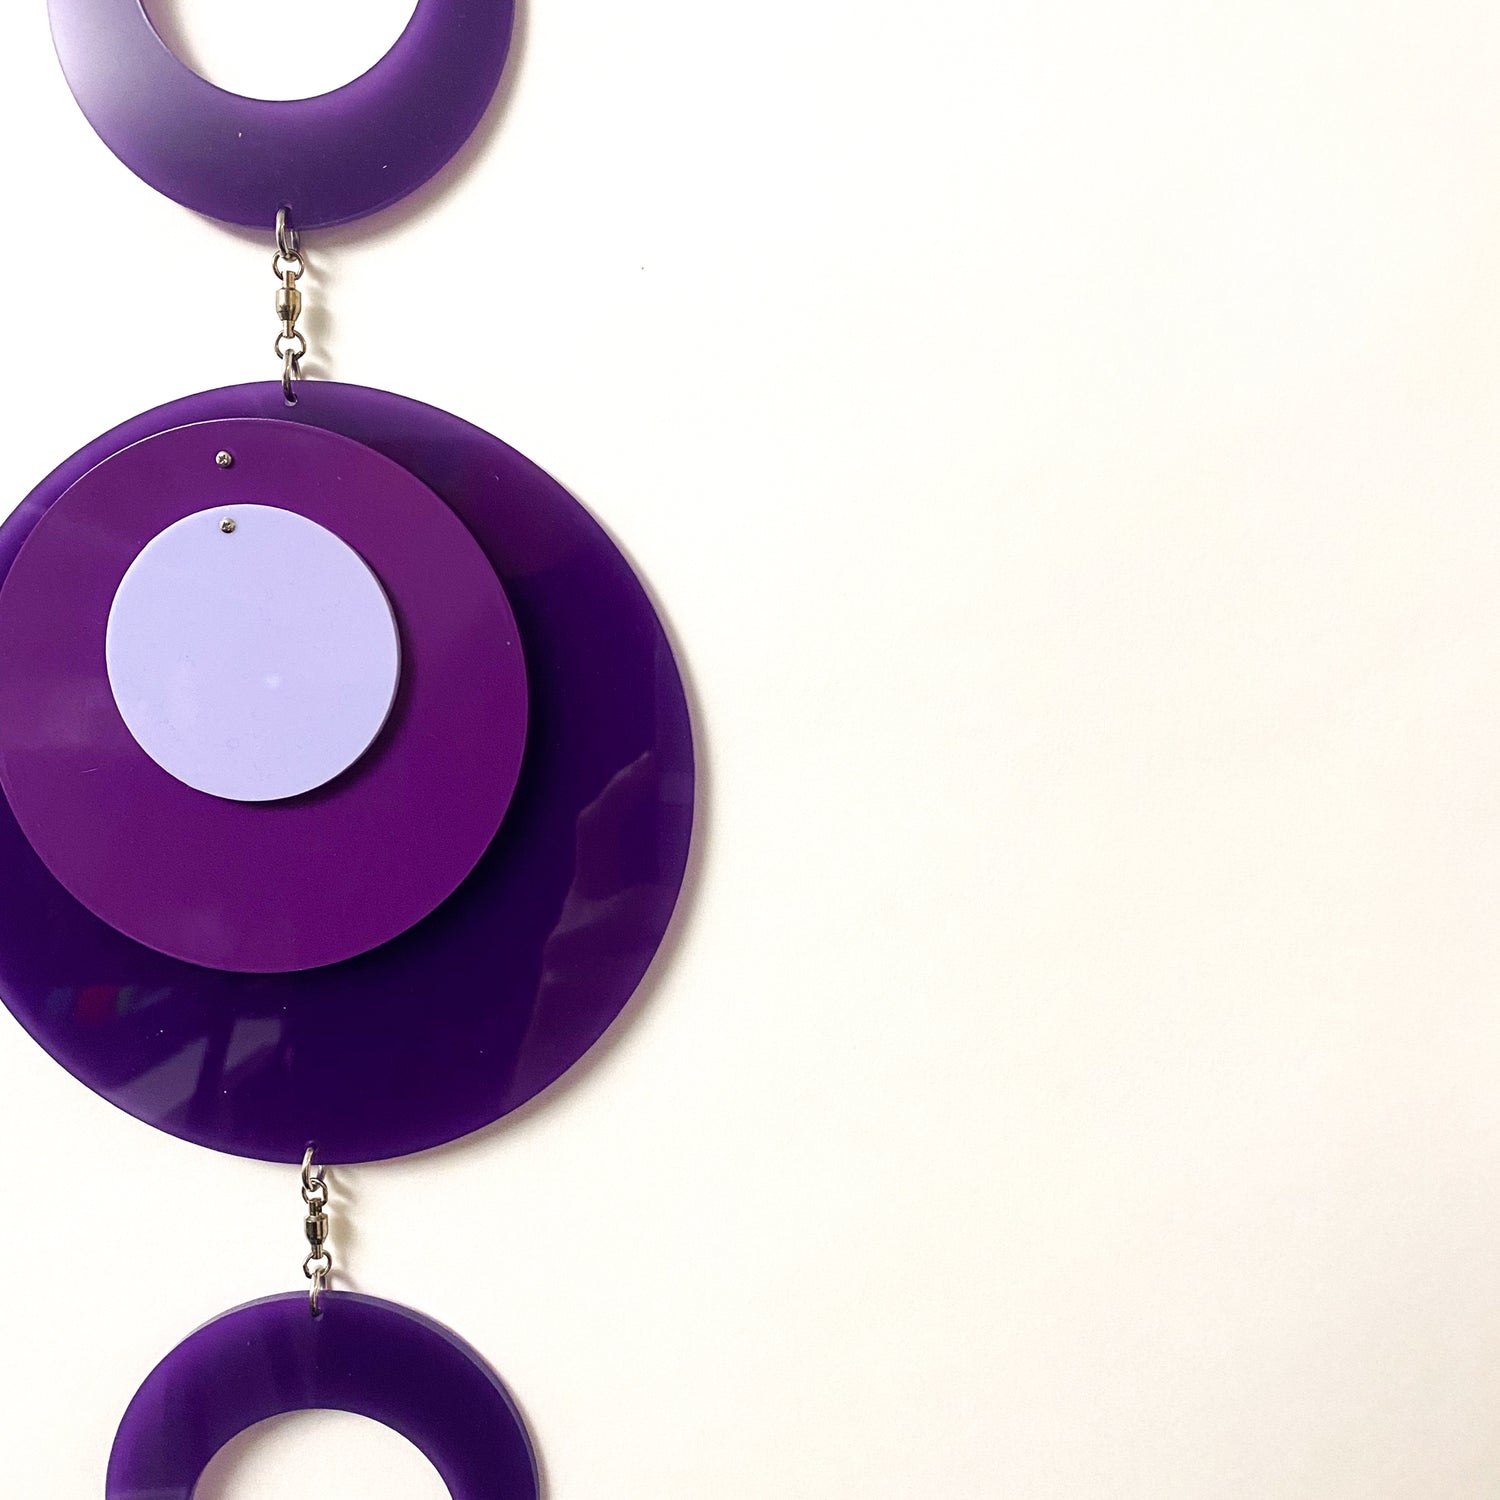 Hot Retro 1970s vertical kinetic art mobile in purple circle DOTS ready to ship today by AtomicMobiles.com